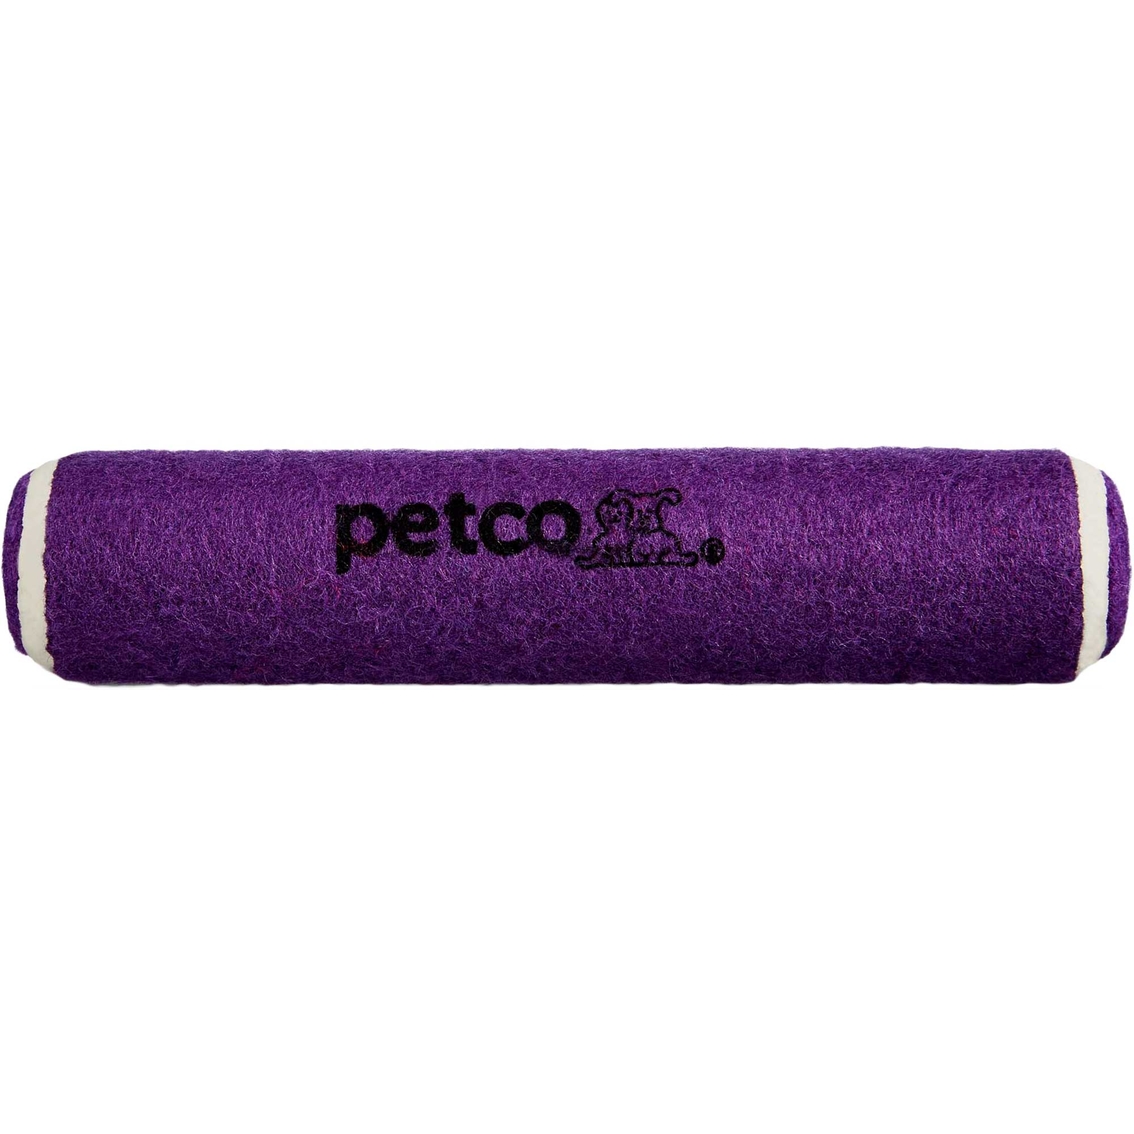 Petco Tennis Ball and Stick Dog Toy 7.5 in., Assorted Colors - Image 2 of 3